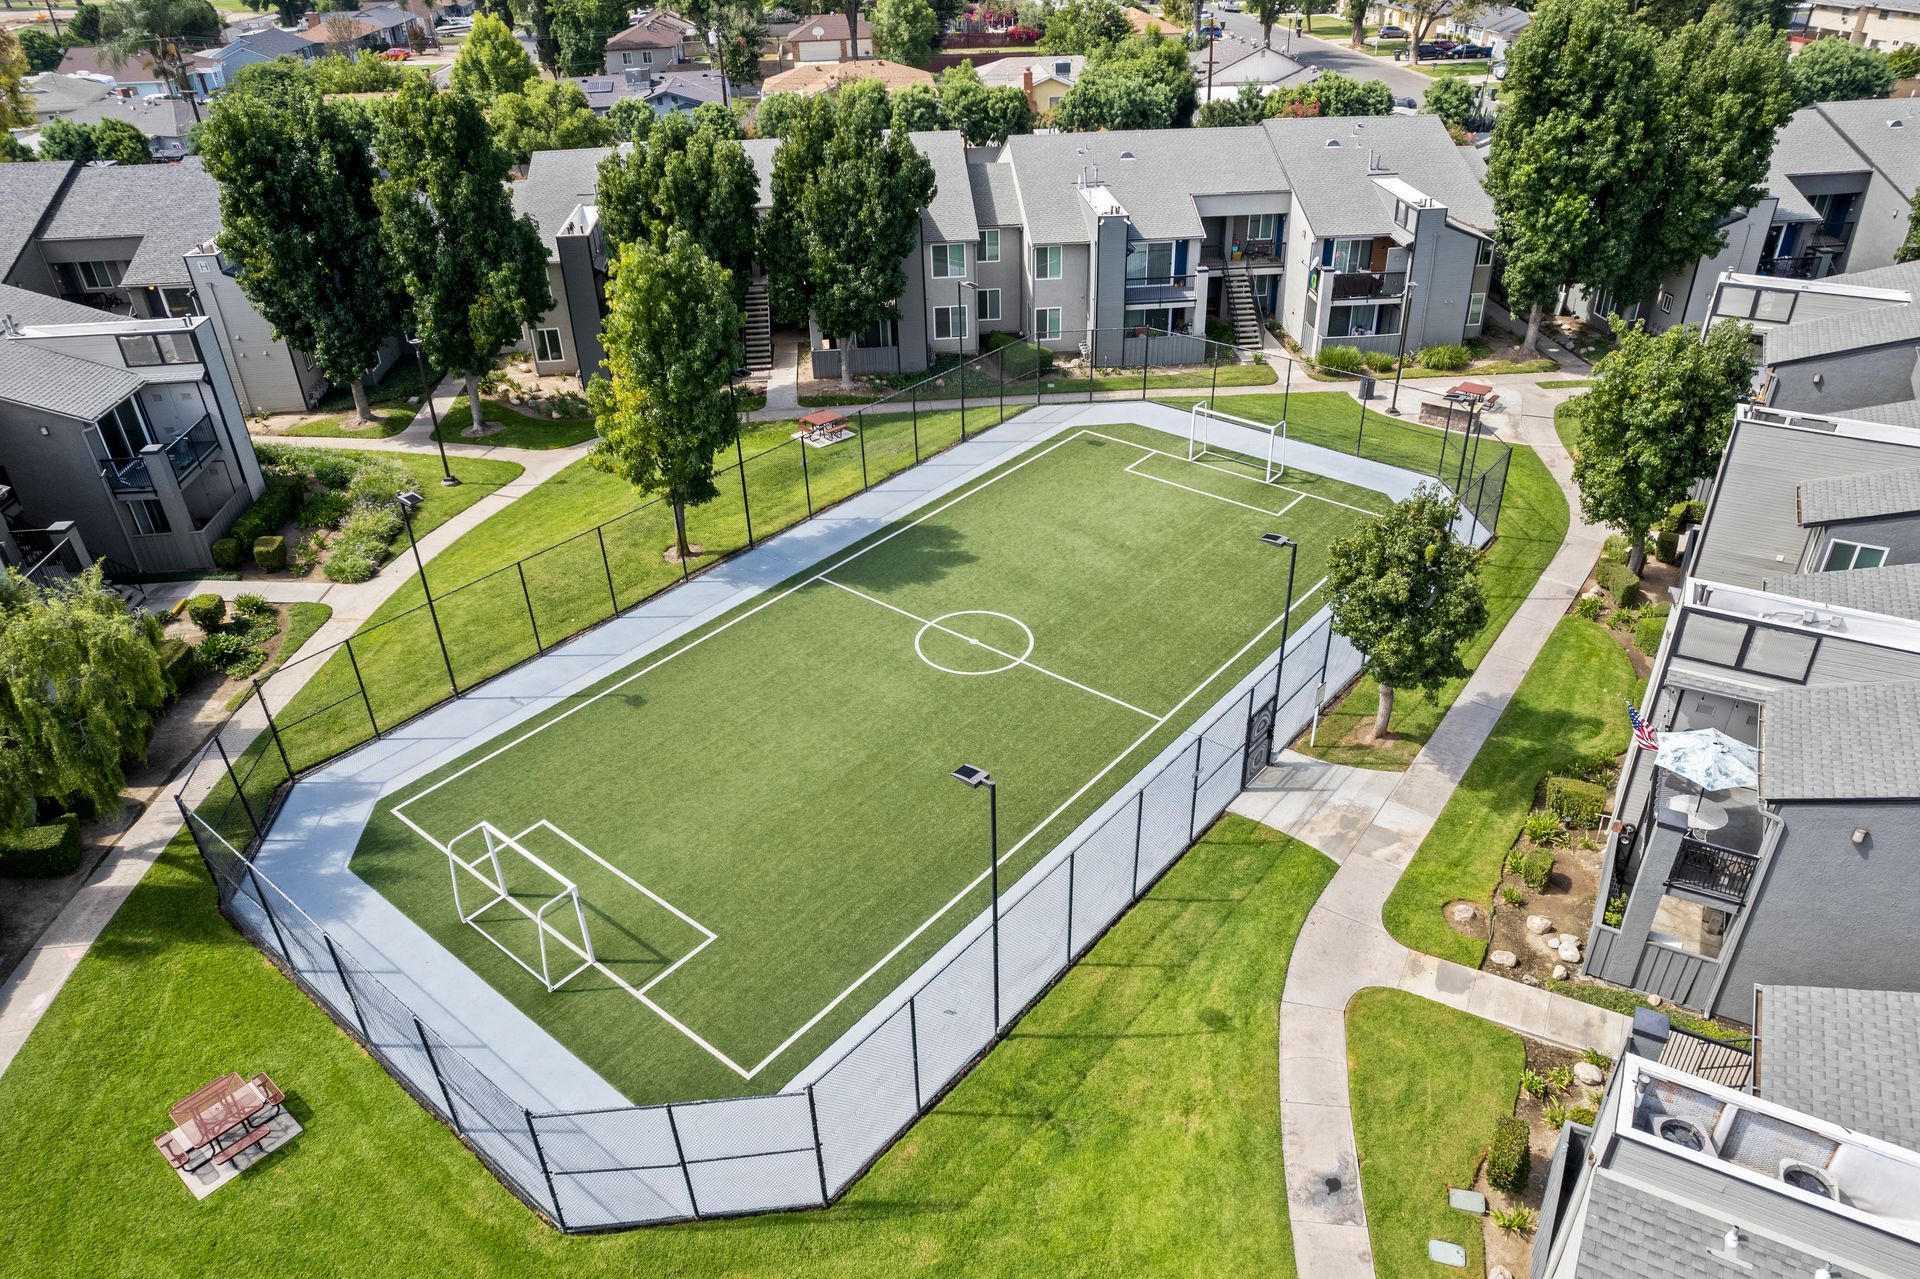 An aerial view of a soccer field in a park surrounded by buildings.